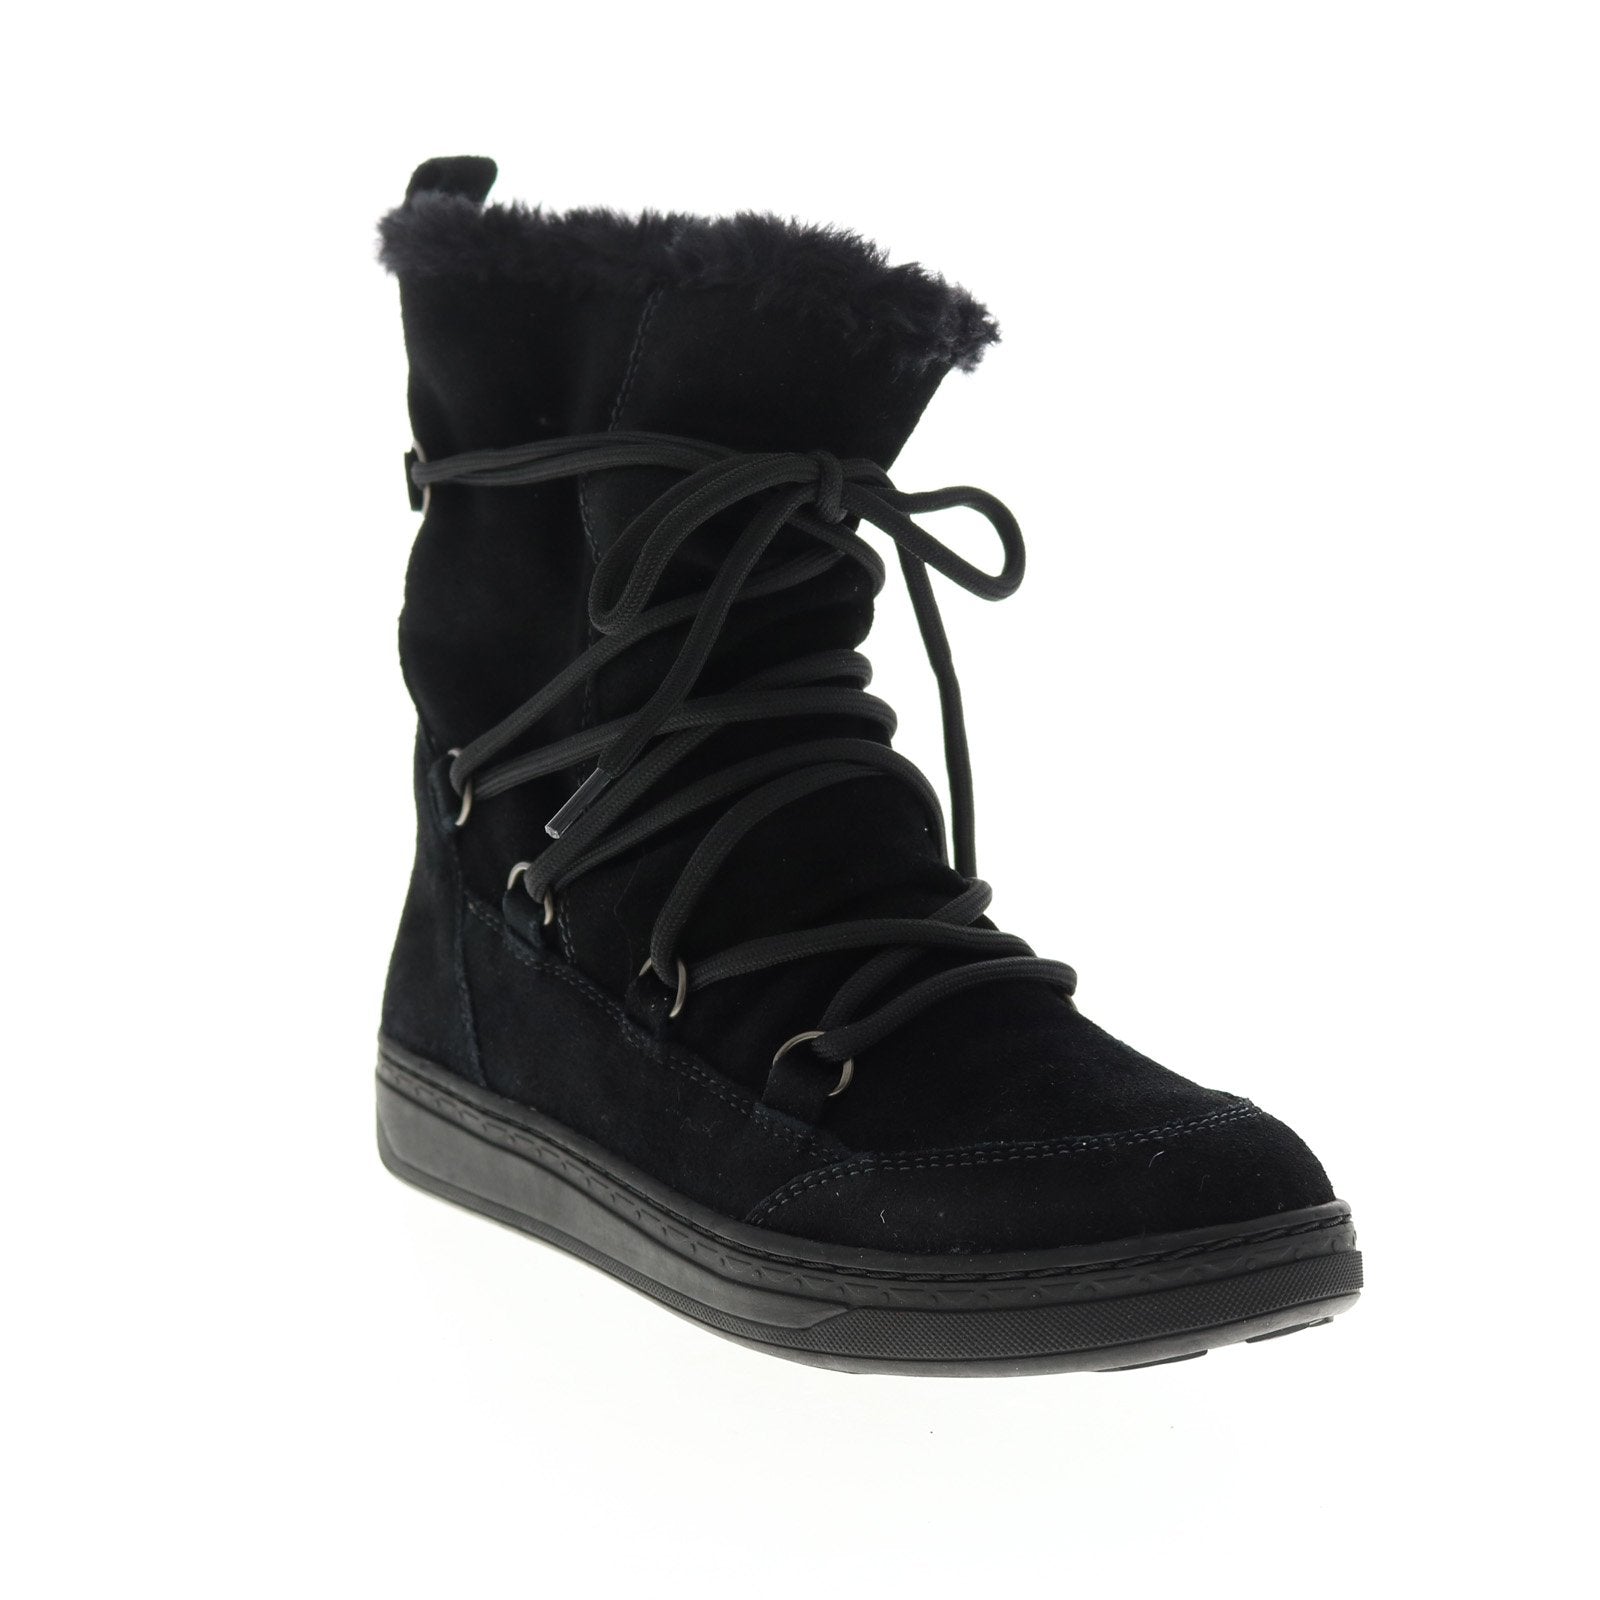 Earth Zodiac Snow Boot Womens Black Suede Lace Up Mid Calf Boots - Ruze ...